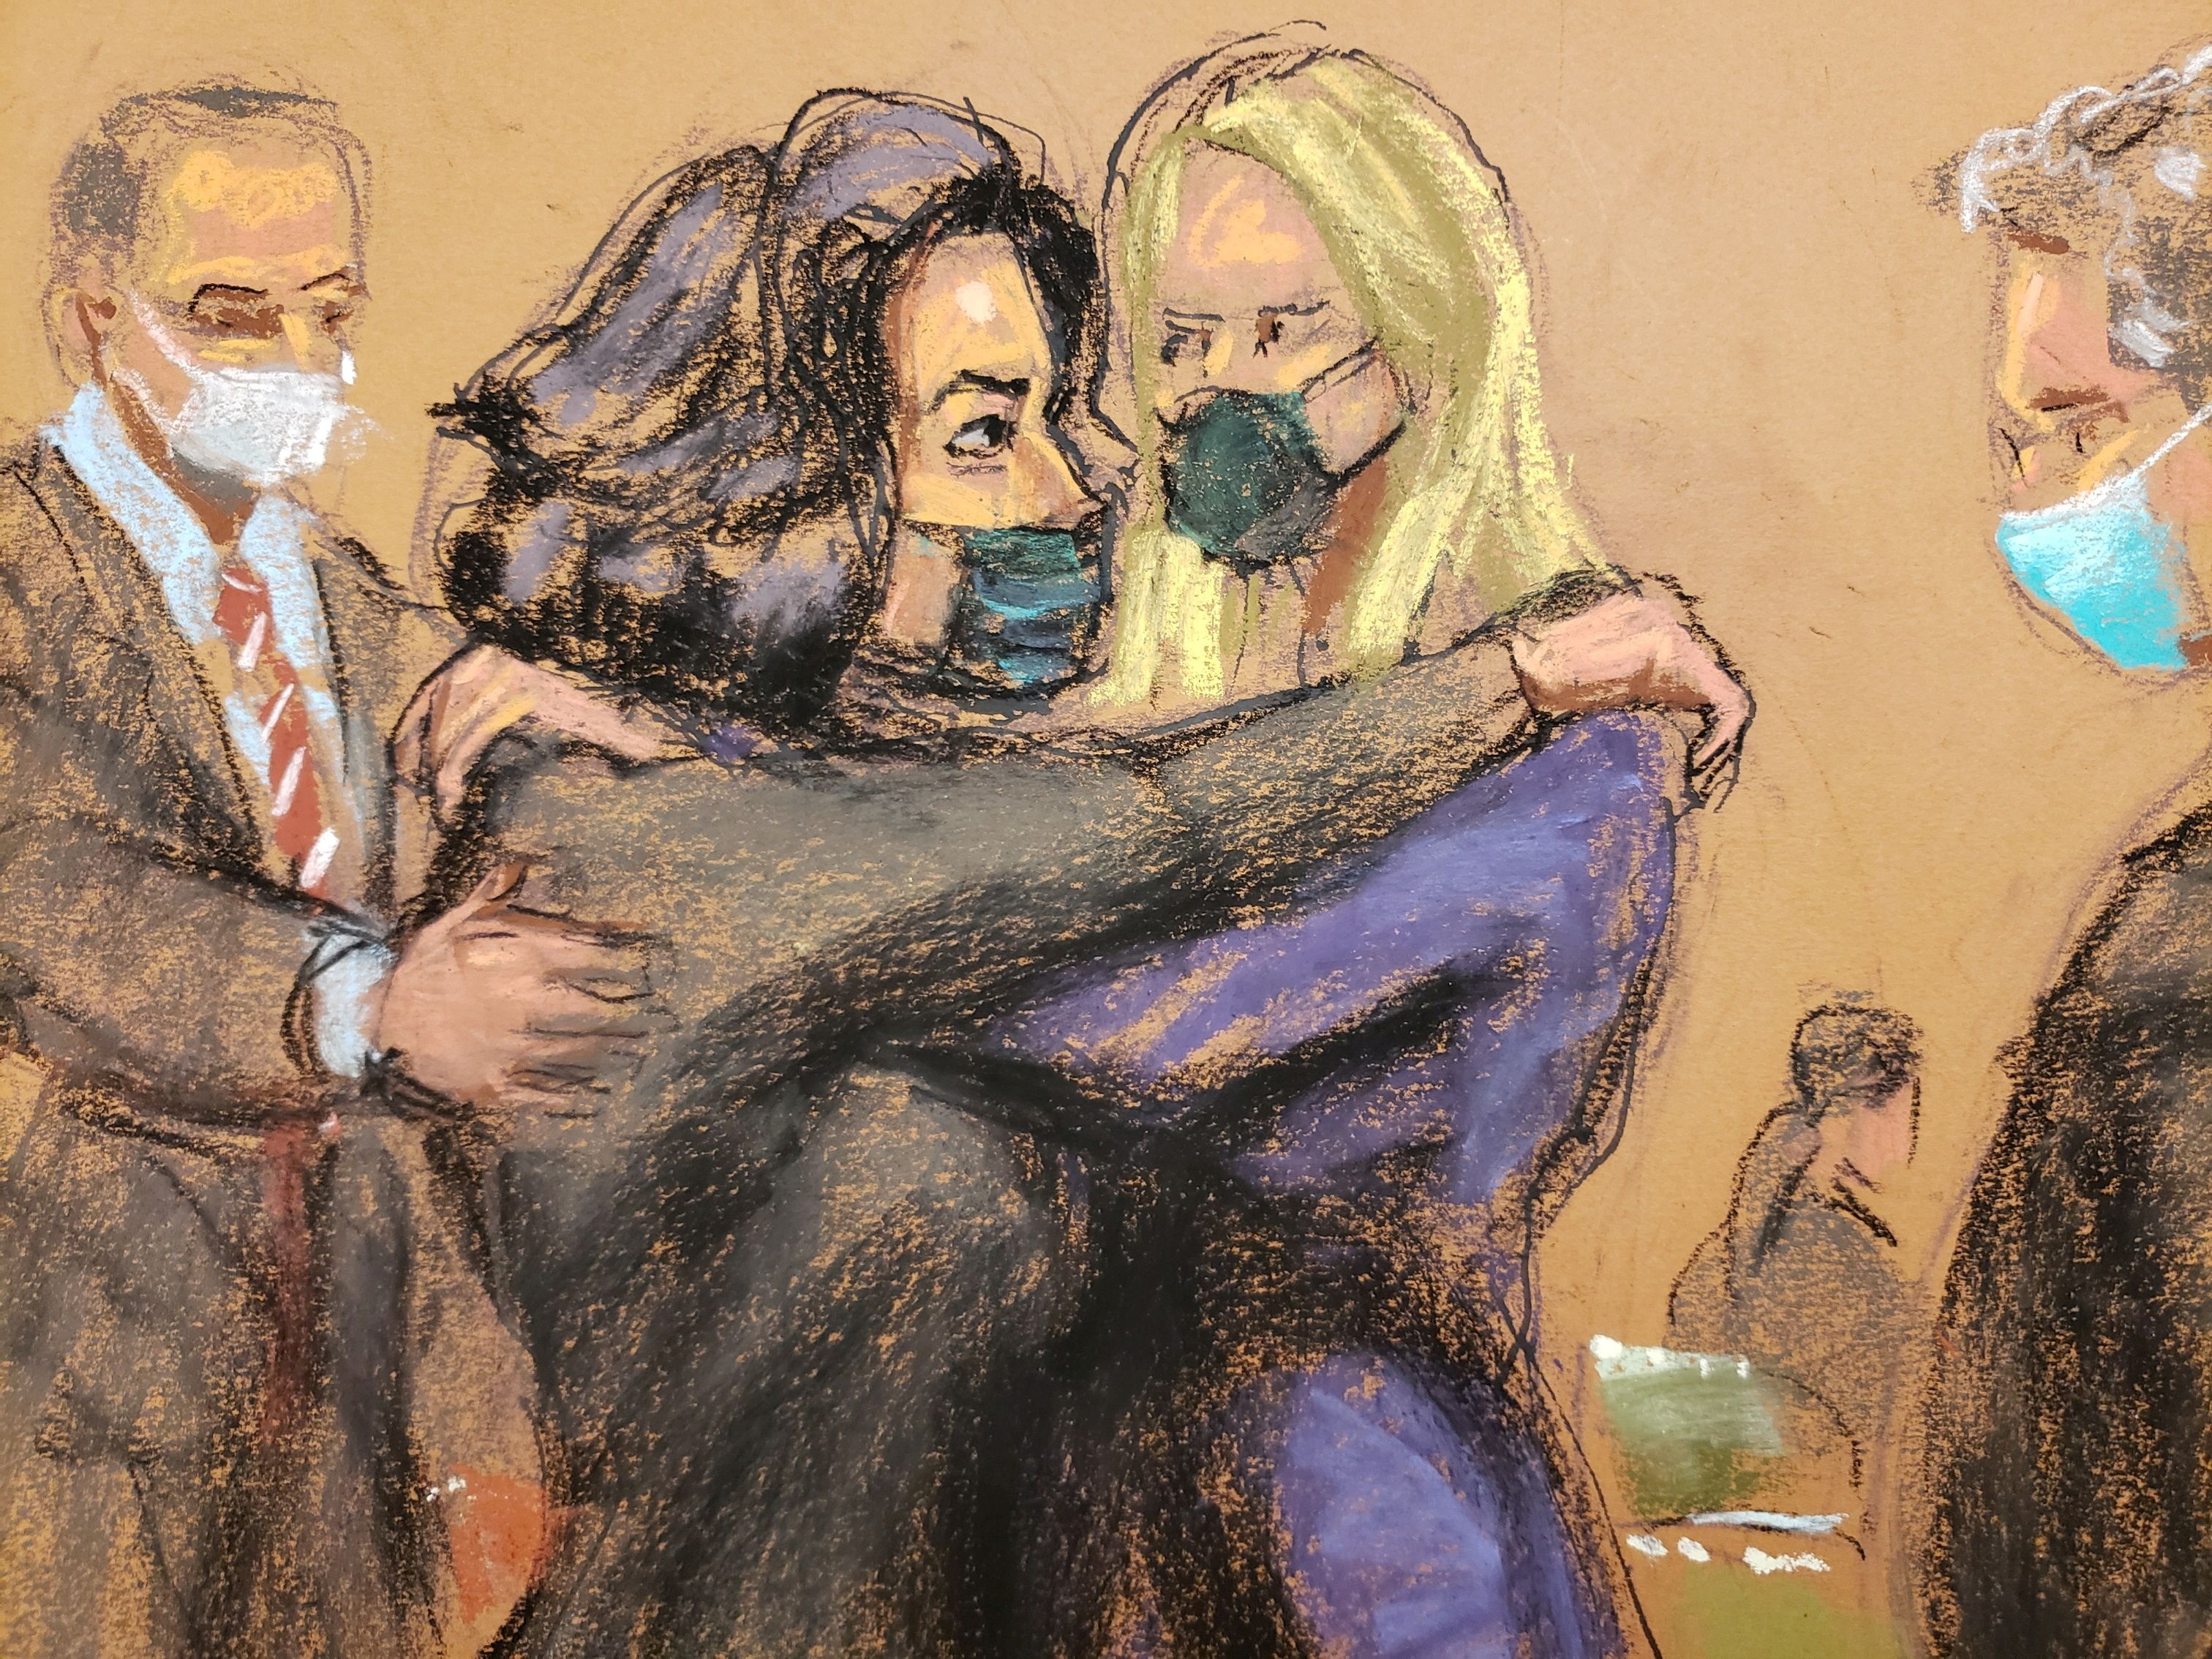 Ghislaine Maxwell hugs her attorney as she arrives for jury selection in the trial of Maxwell, Jeffrey Epstein's associate accused of sex trafficking, in a courtroom sketch in New York City, U.S., November 18, 2021. REUTERS/Jane Rosenberg